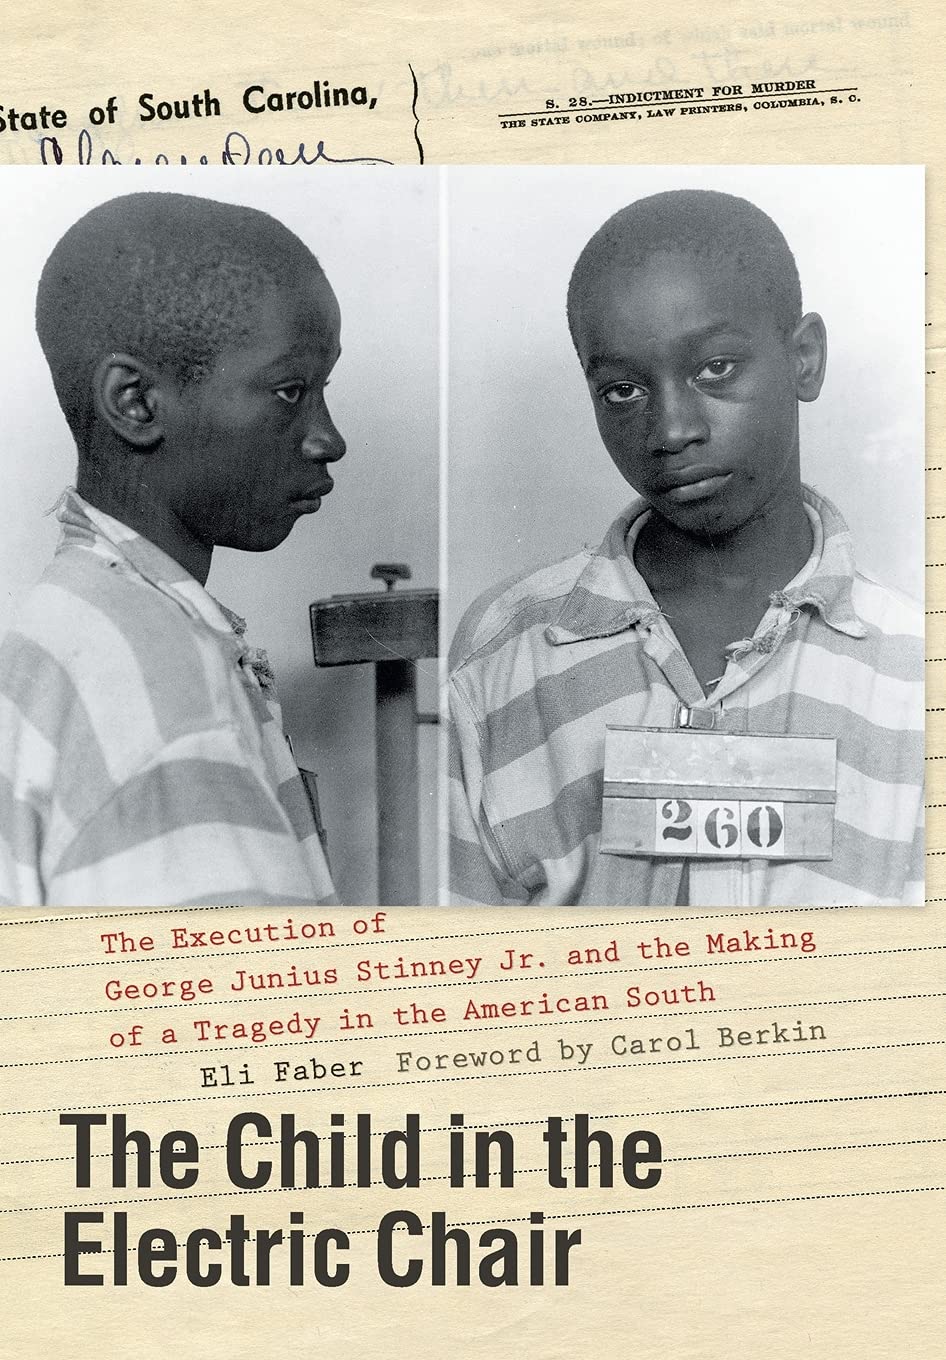 Book cover with black and white mug shot of young Black boy